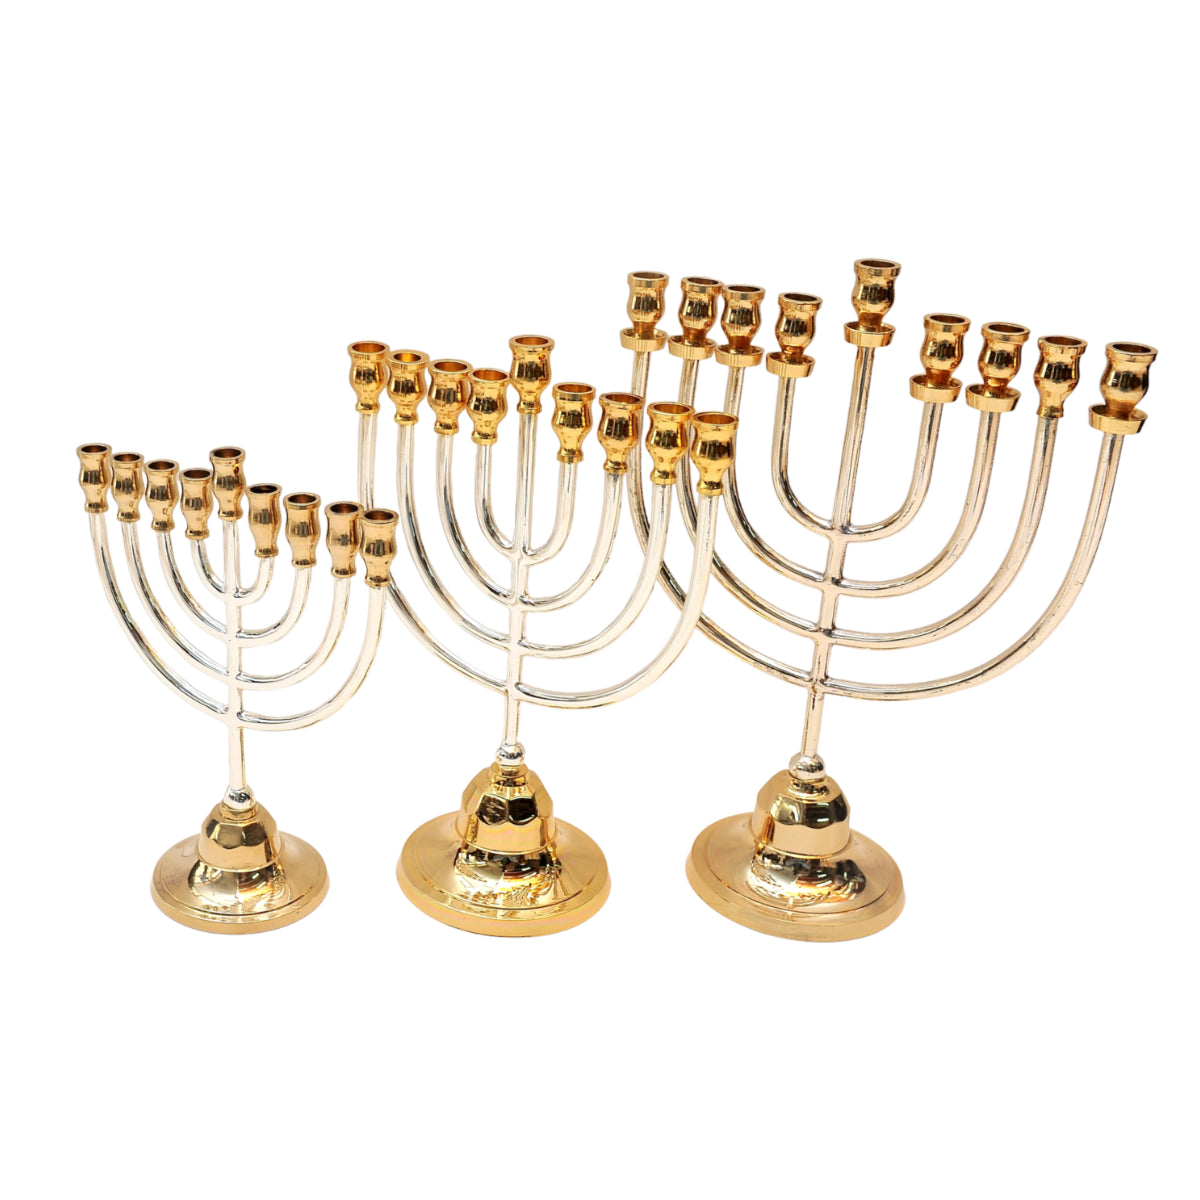 Authentic Temple Menorah HANUKKAH Gold & Silver Plated Candle Holder Israel #1